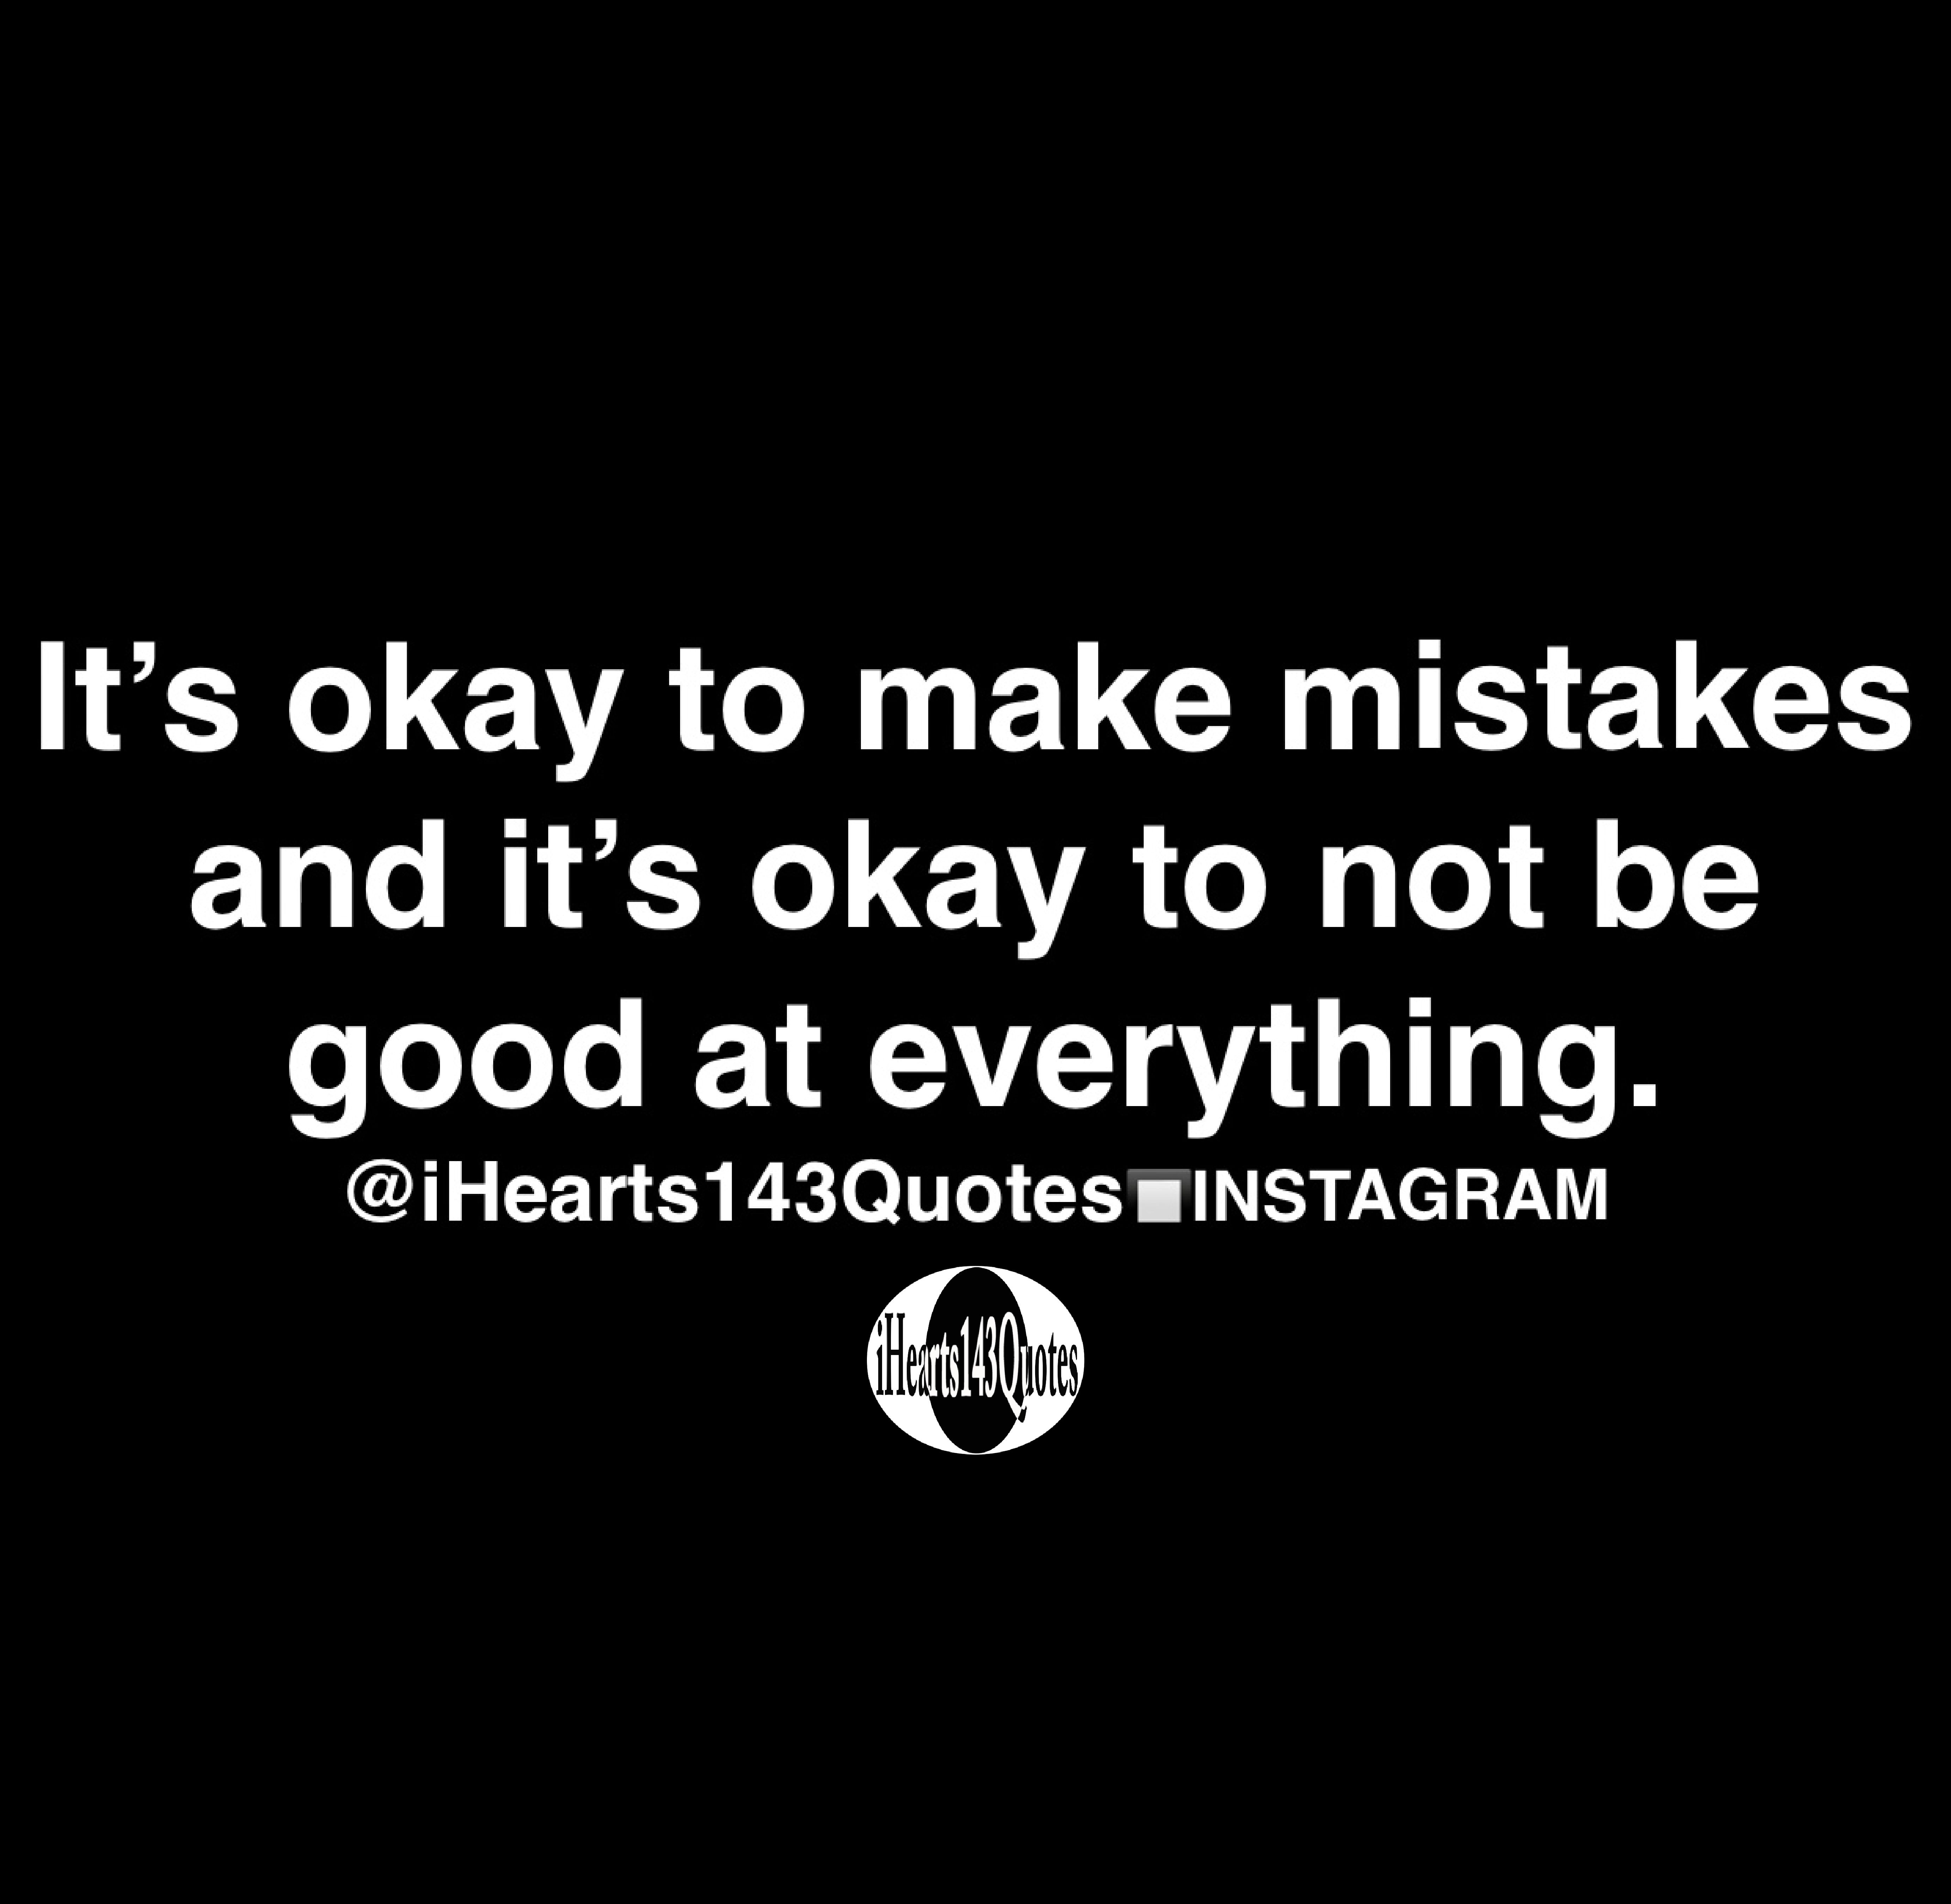 It’s okay to make mistakes and it’s okay to not be good at everything